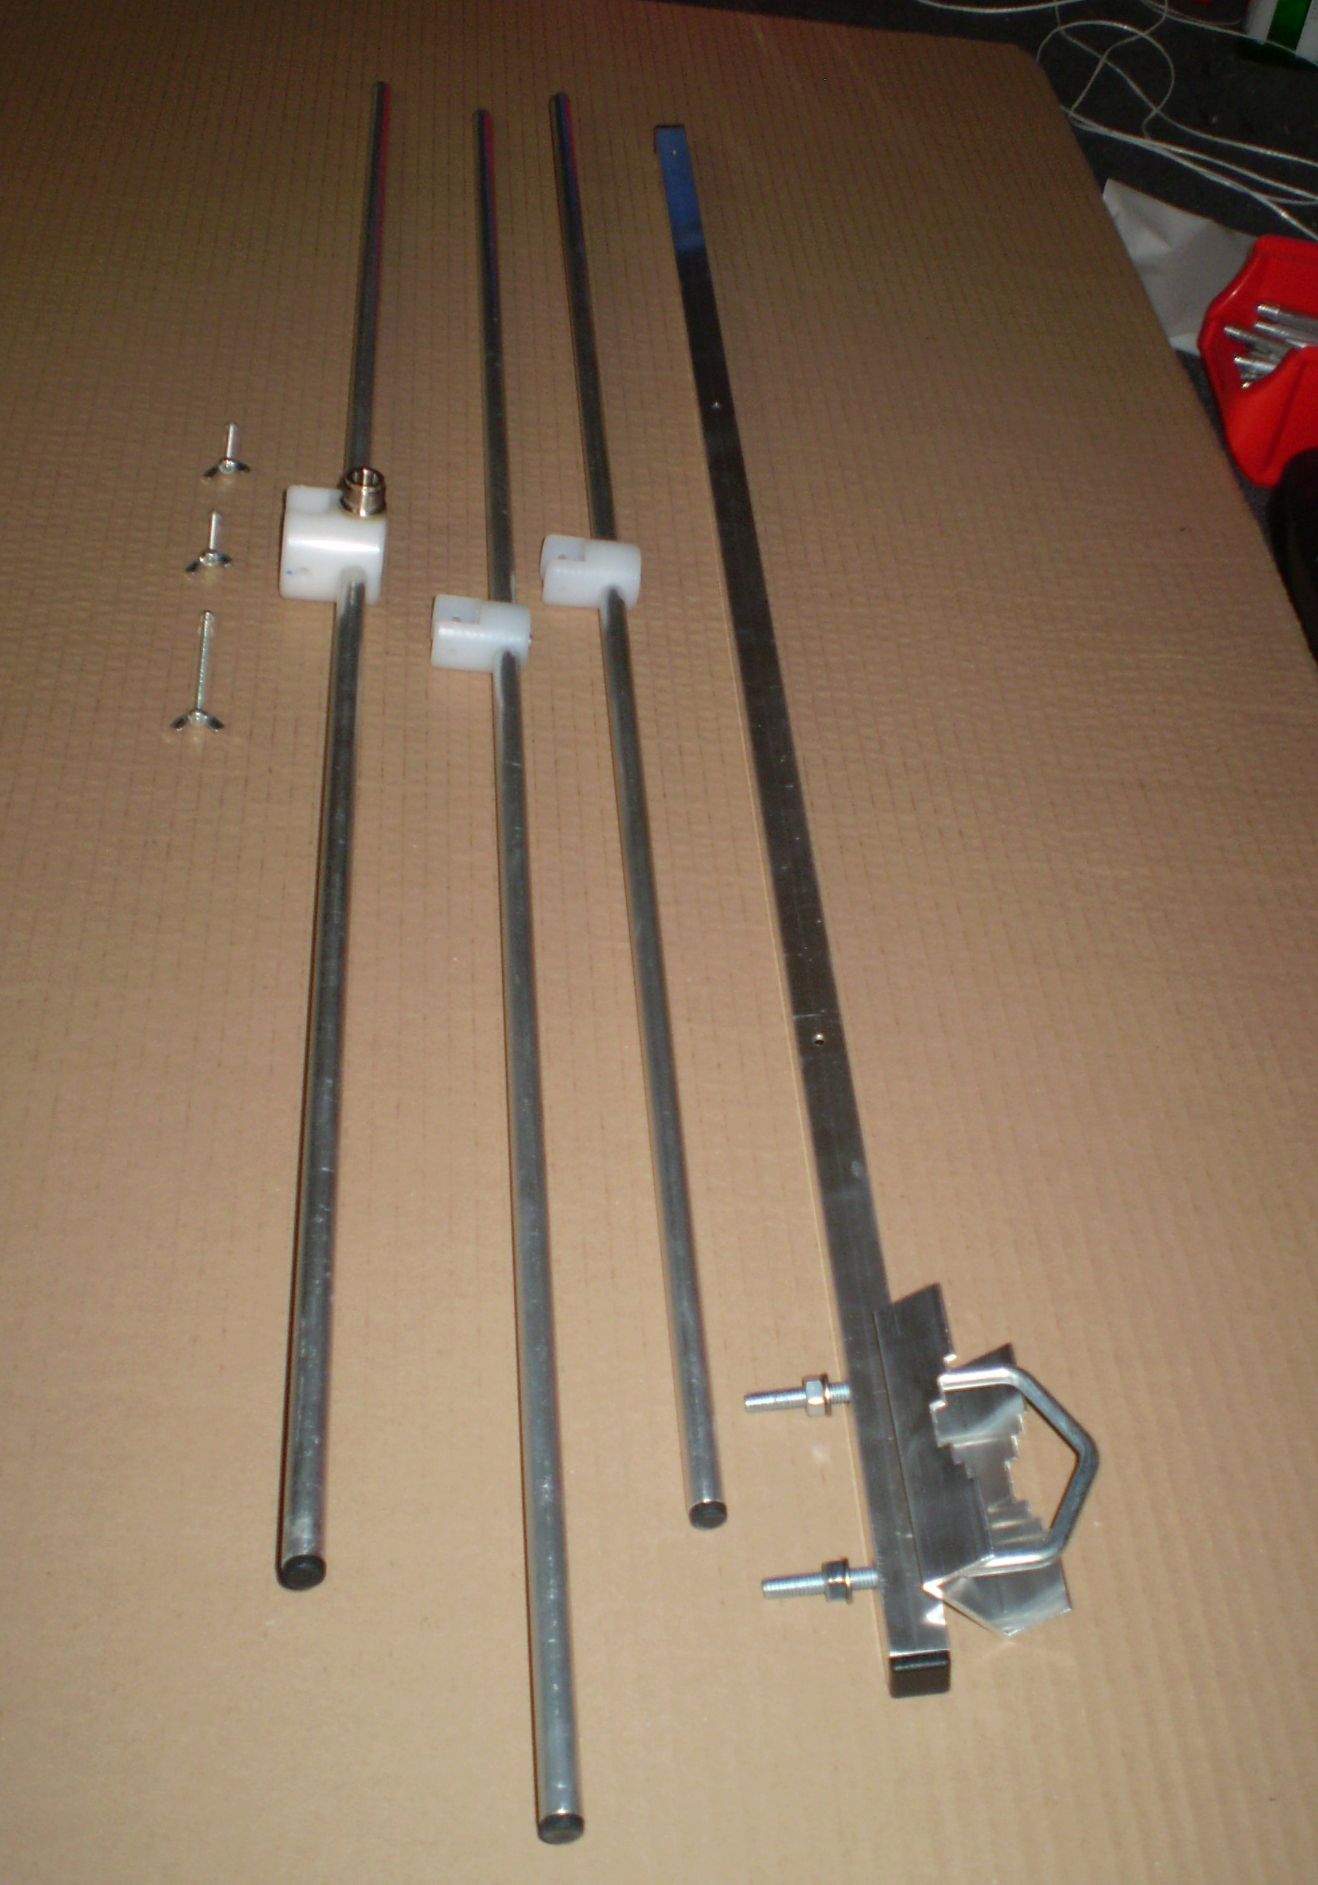 3 ELEMENT YAGI FOR VHF FREQUENCIES RX ONLY